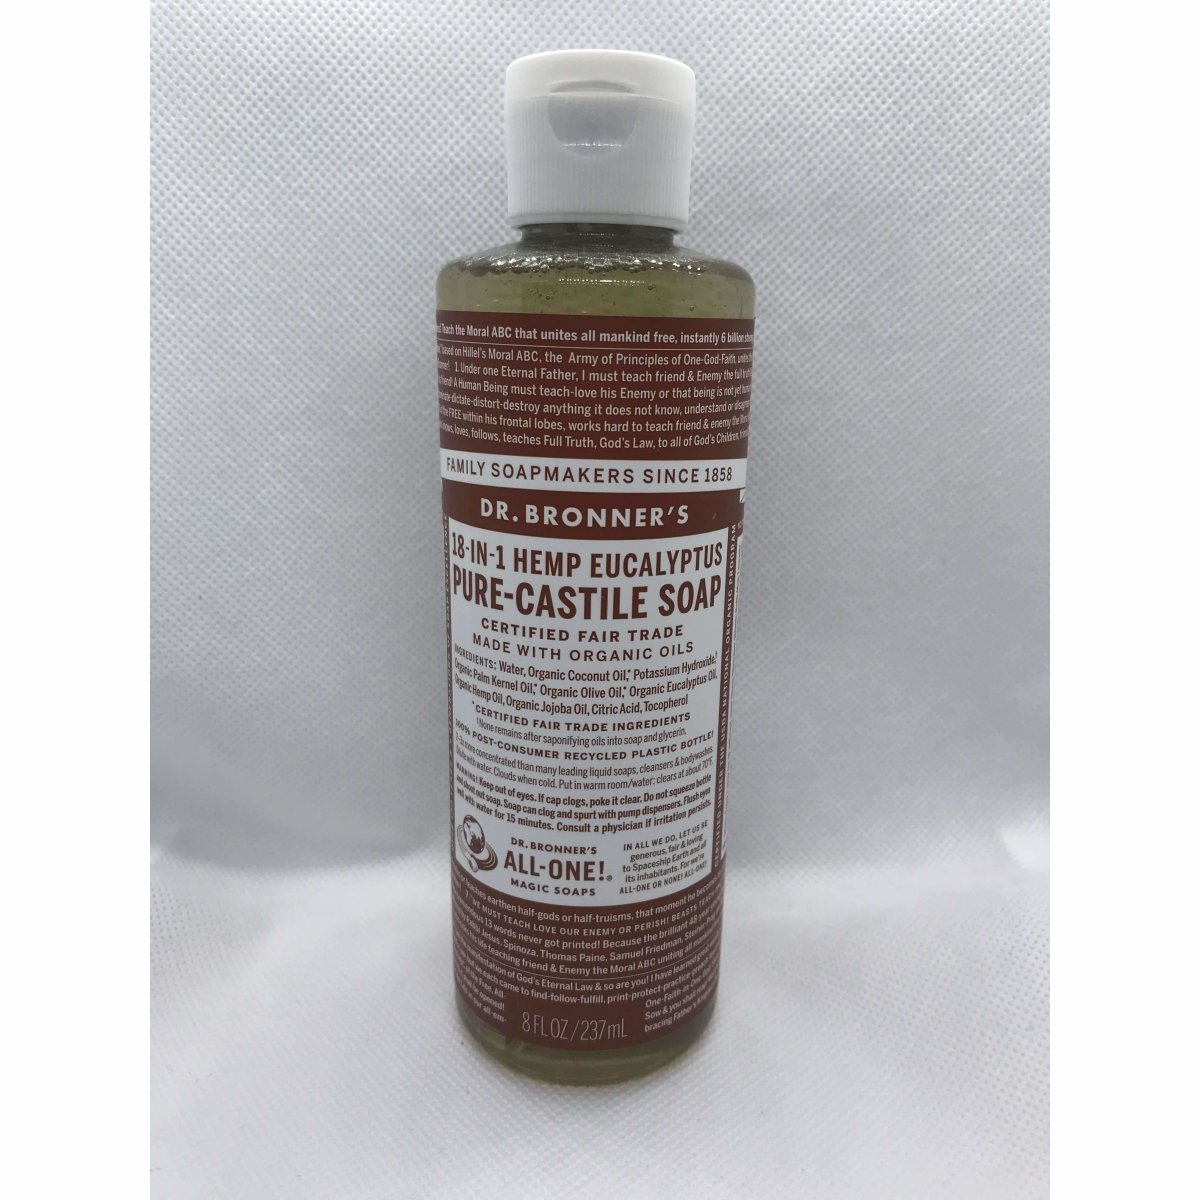 Pure Castile Soap - Made with Organic Oils 8 Oz